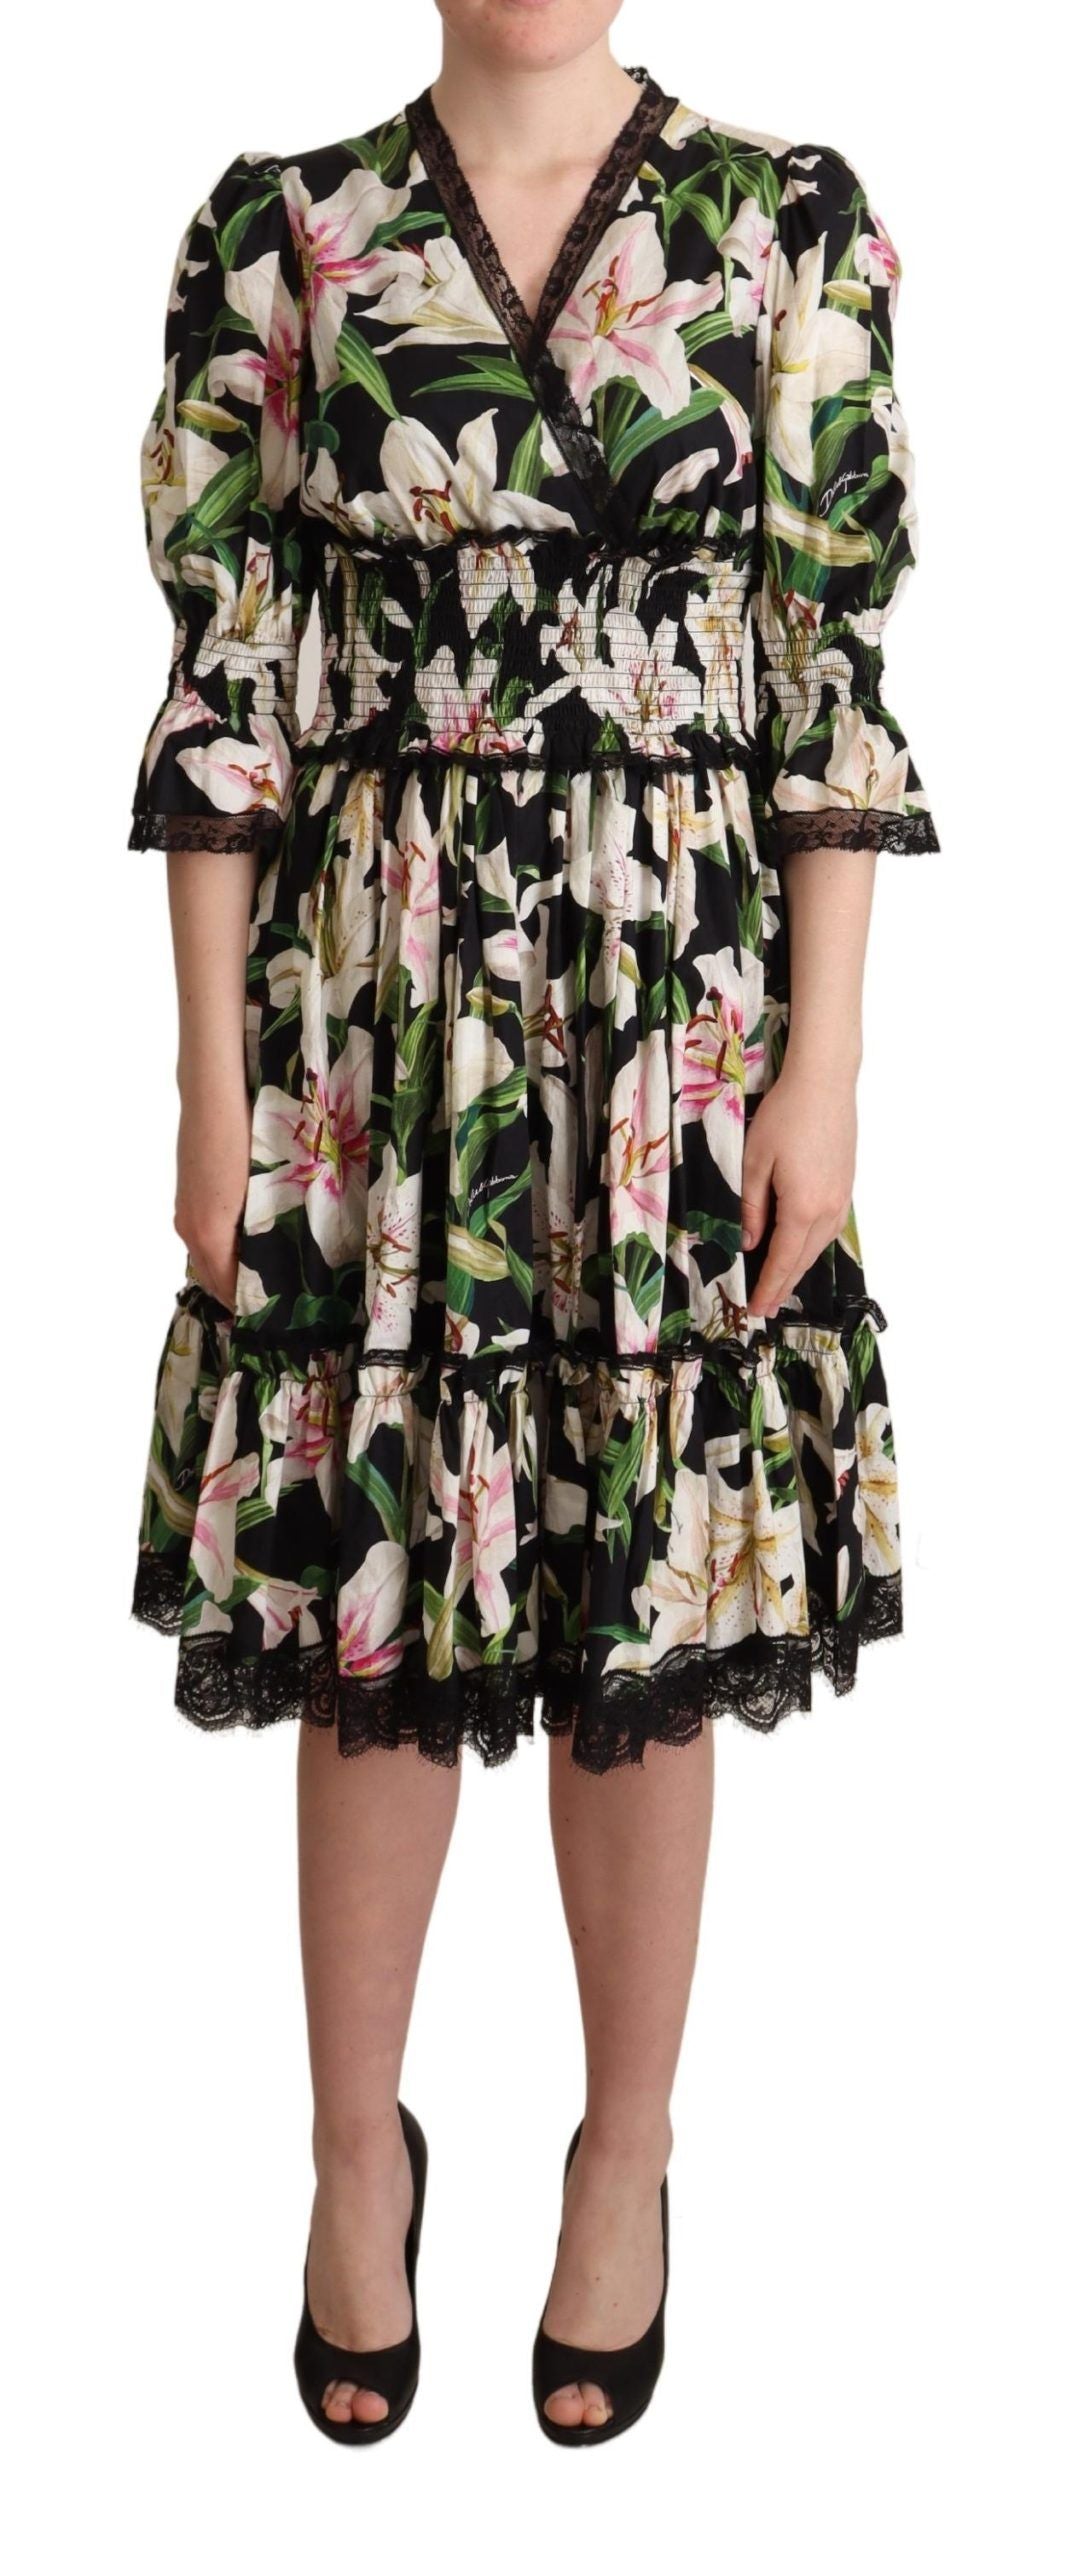 Black Cotton Lily Print Lace Trim Dress - Designed by Dolce & Gabbana Available to Buy at a Discounted Price on Moon Behind The Hill Online Designer Discount Store